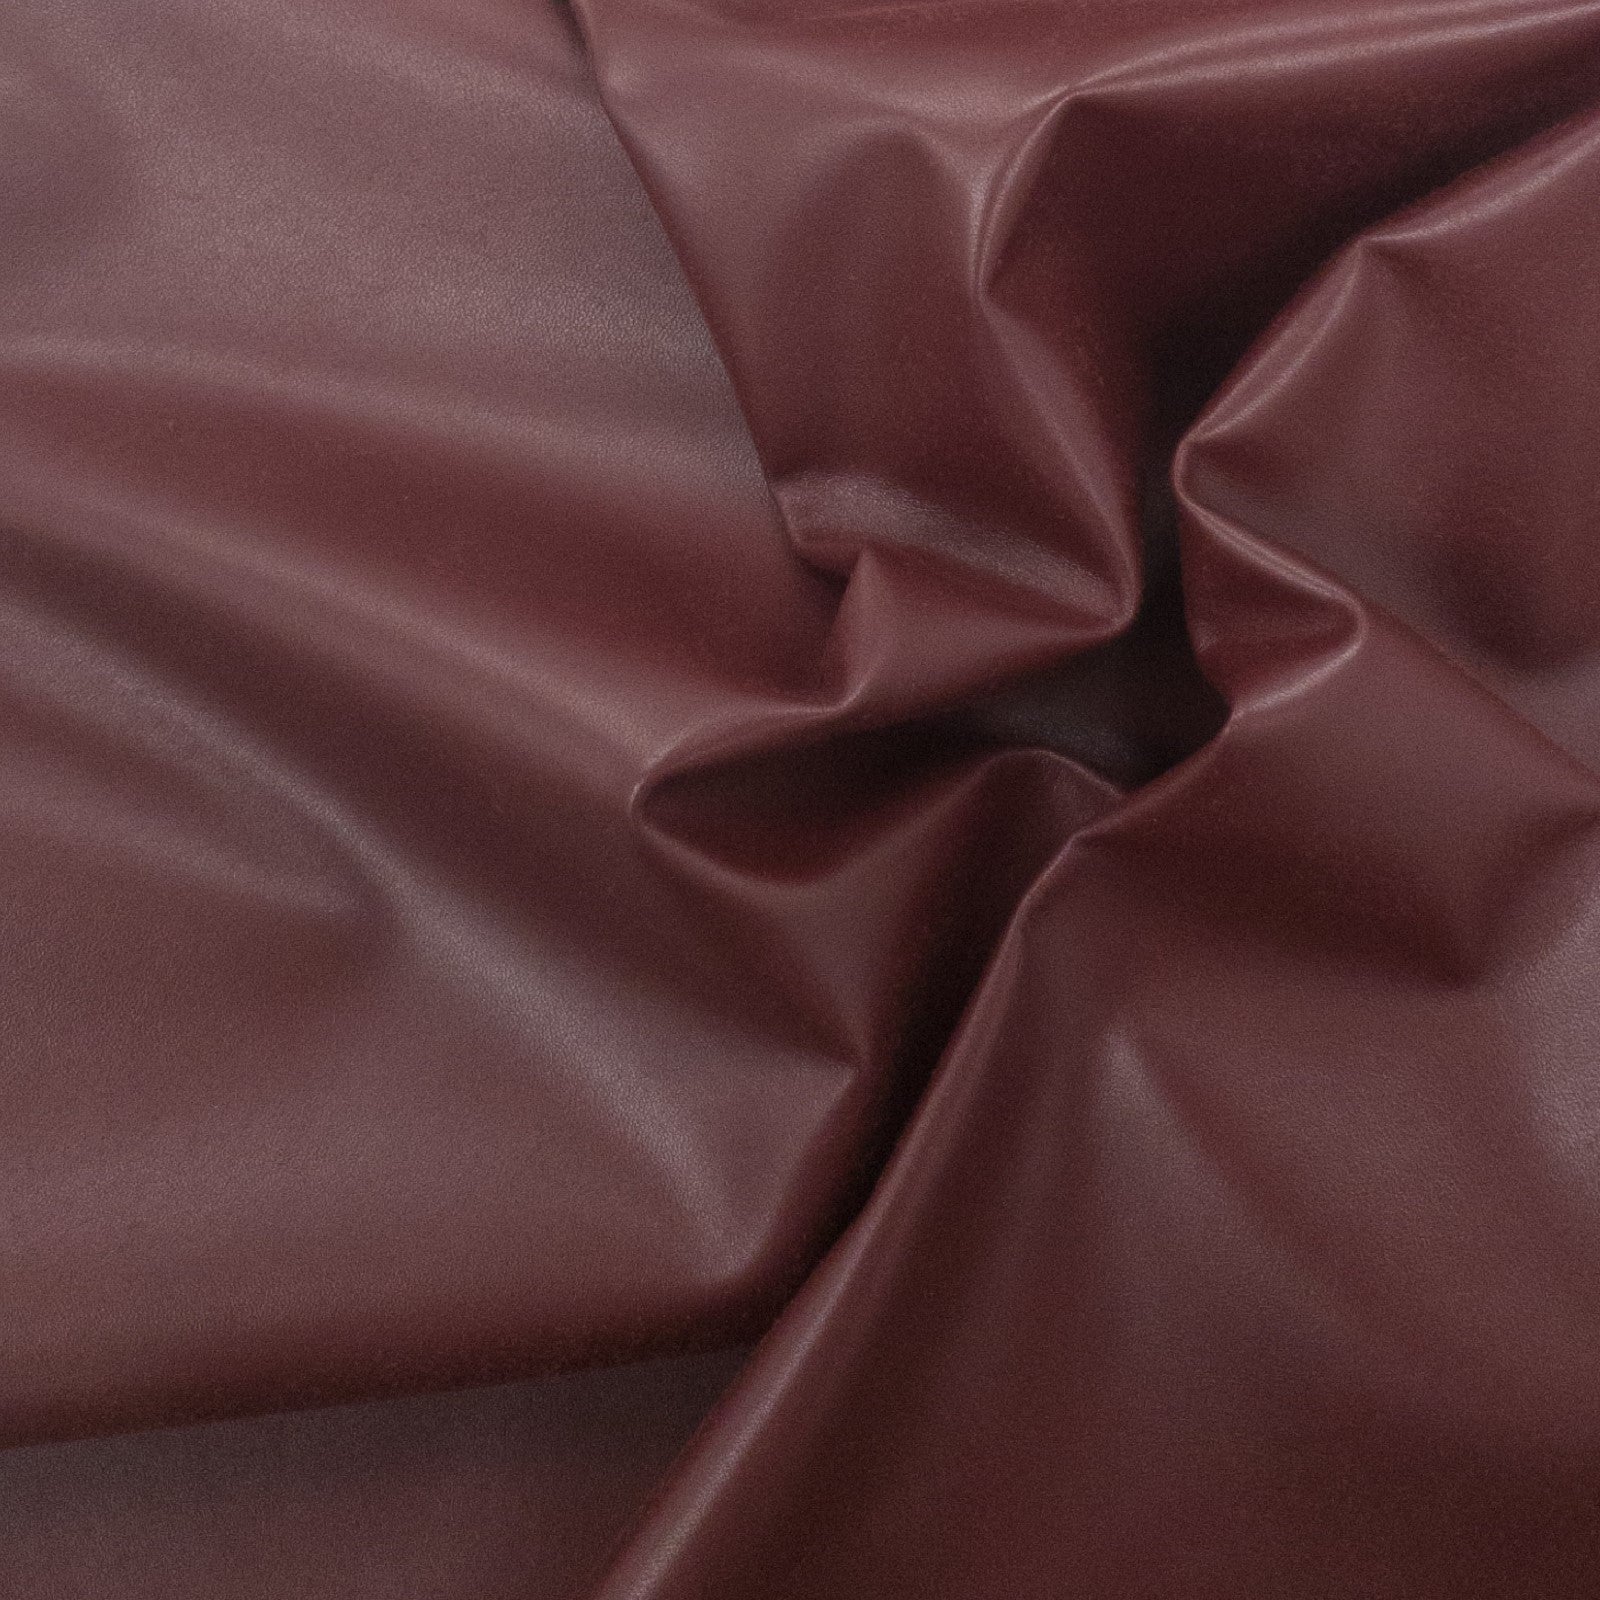 Reds, 3-10 Sq Ft, 1-3 oz, Lamb Hides, Dark Cabernet Red / 5-6 / 1-2 oz (.4-.8 MM) | The Leather Guy